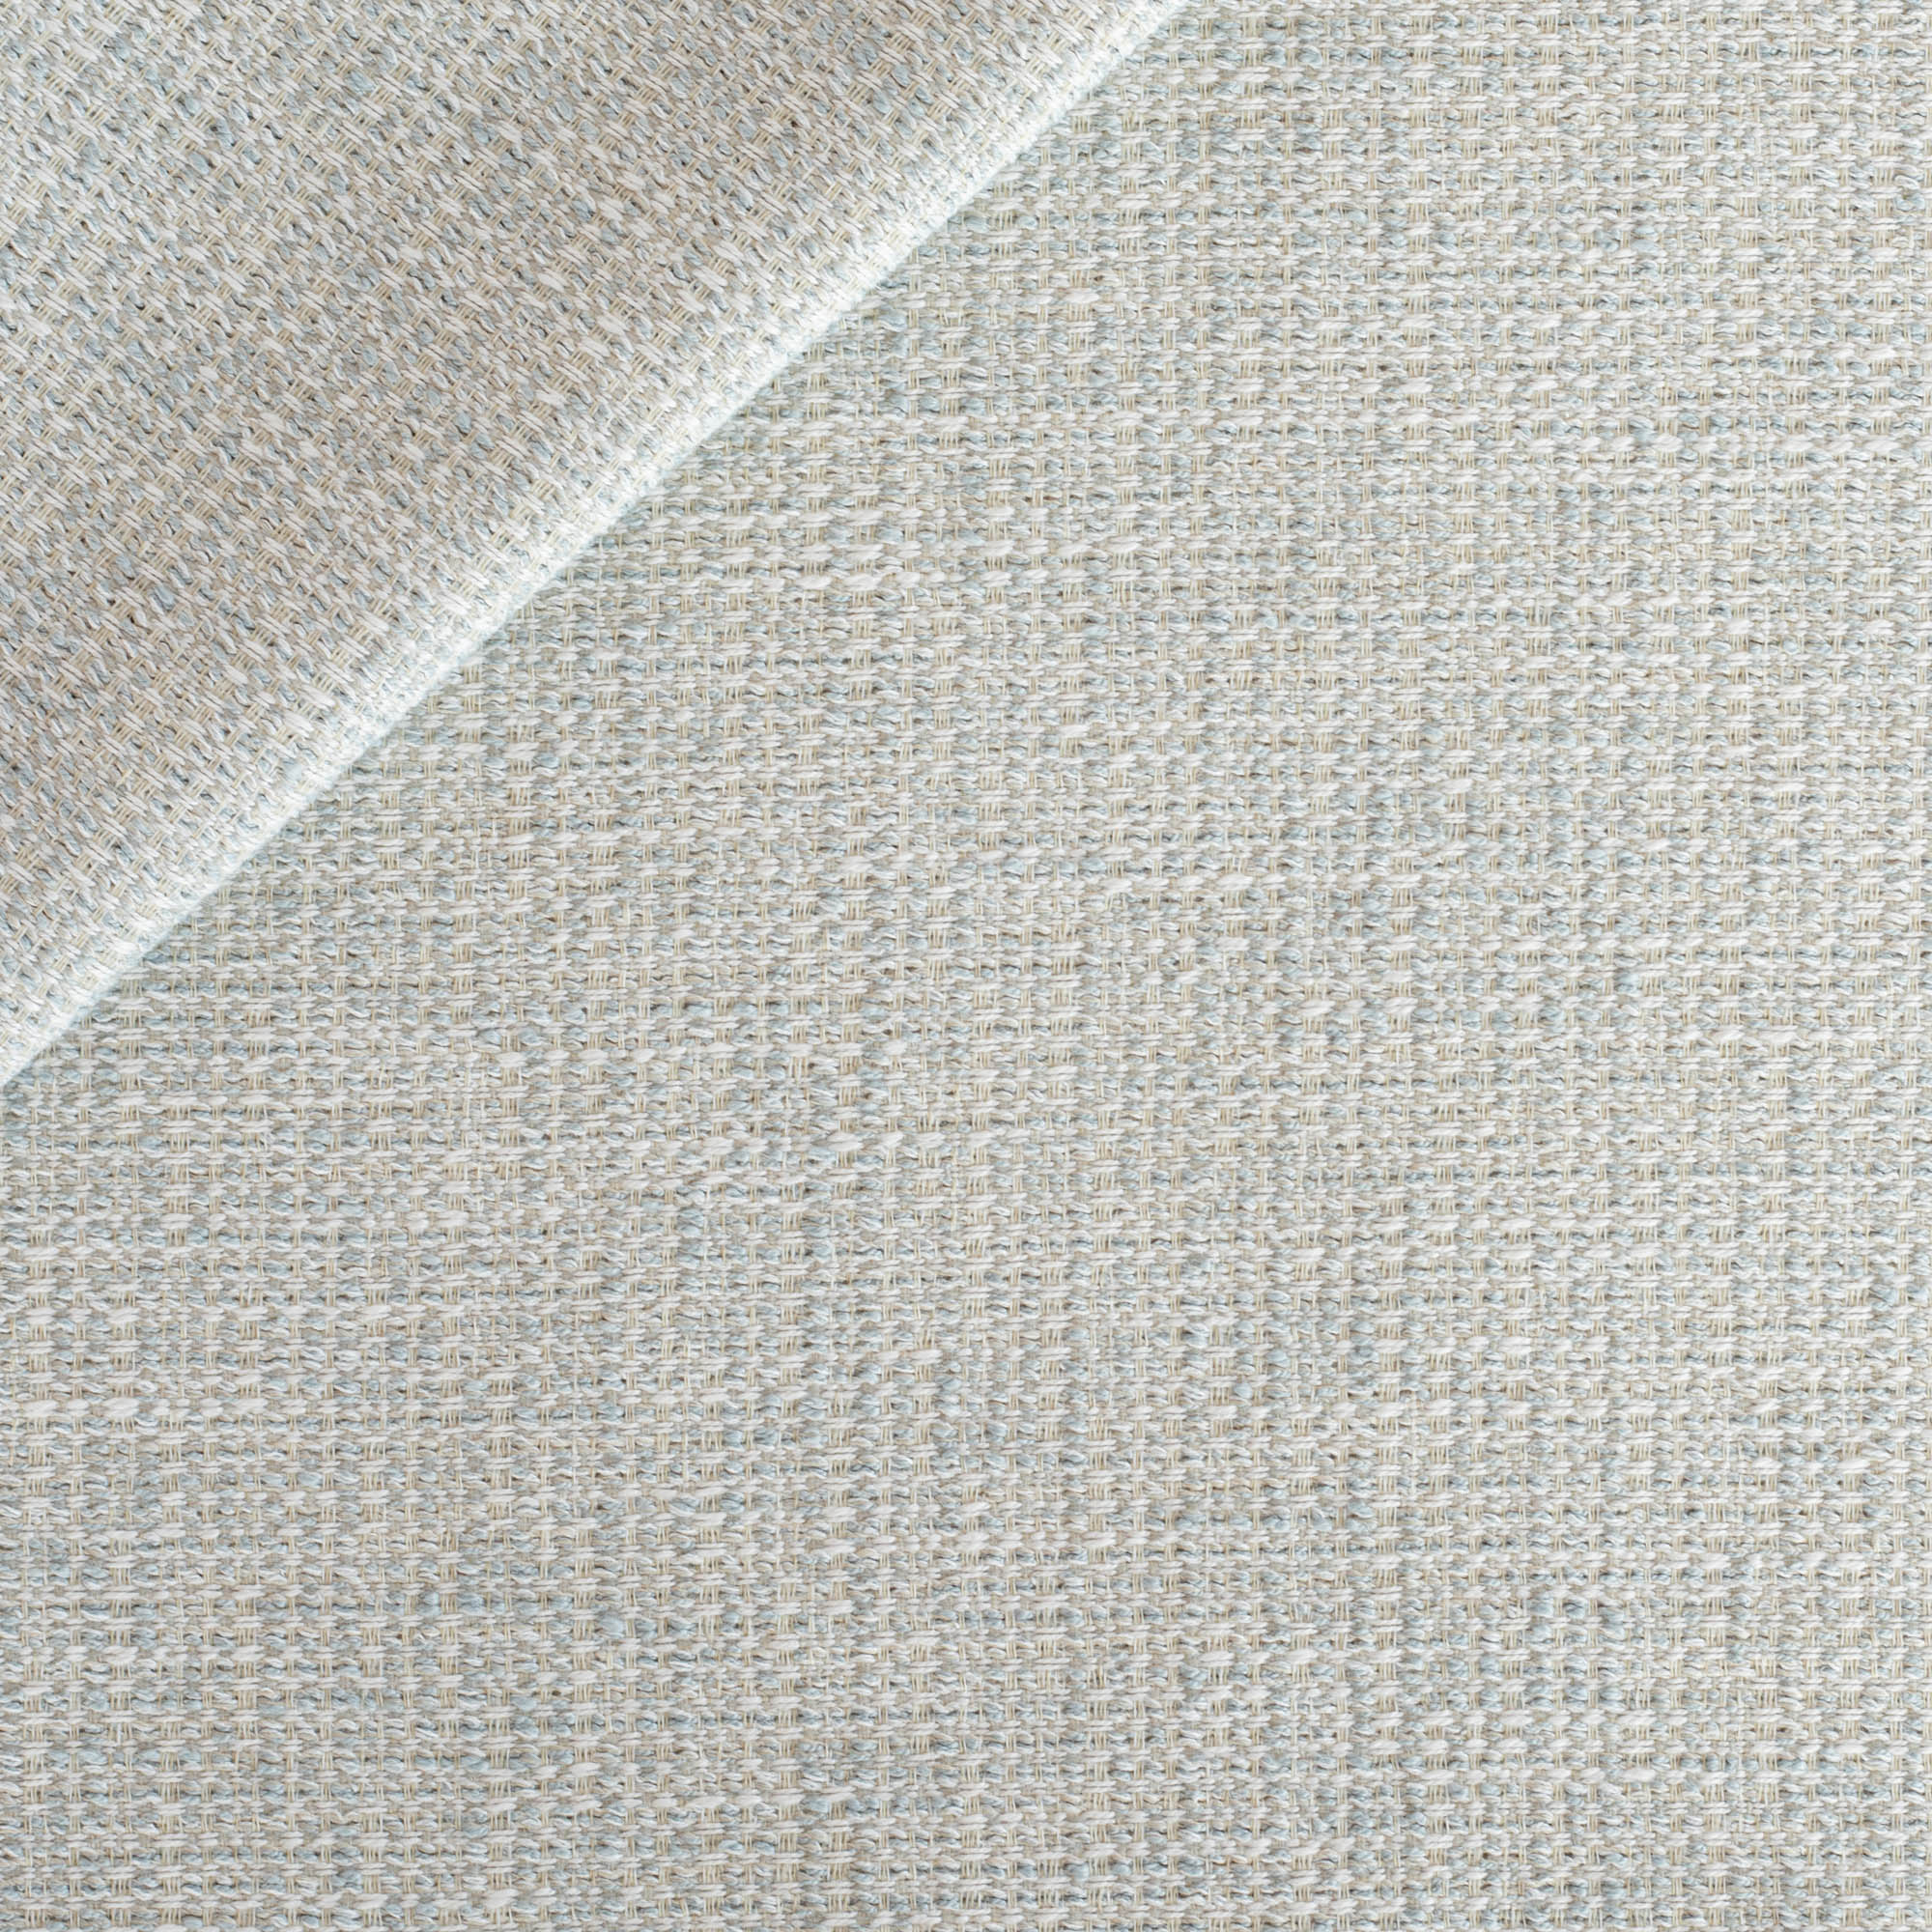 Flynn InsideOut Mist, a cool sky blue tweedy textured outdoor fabric from Tonic Living